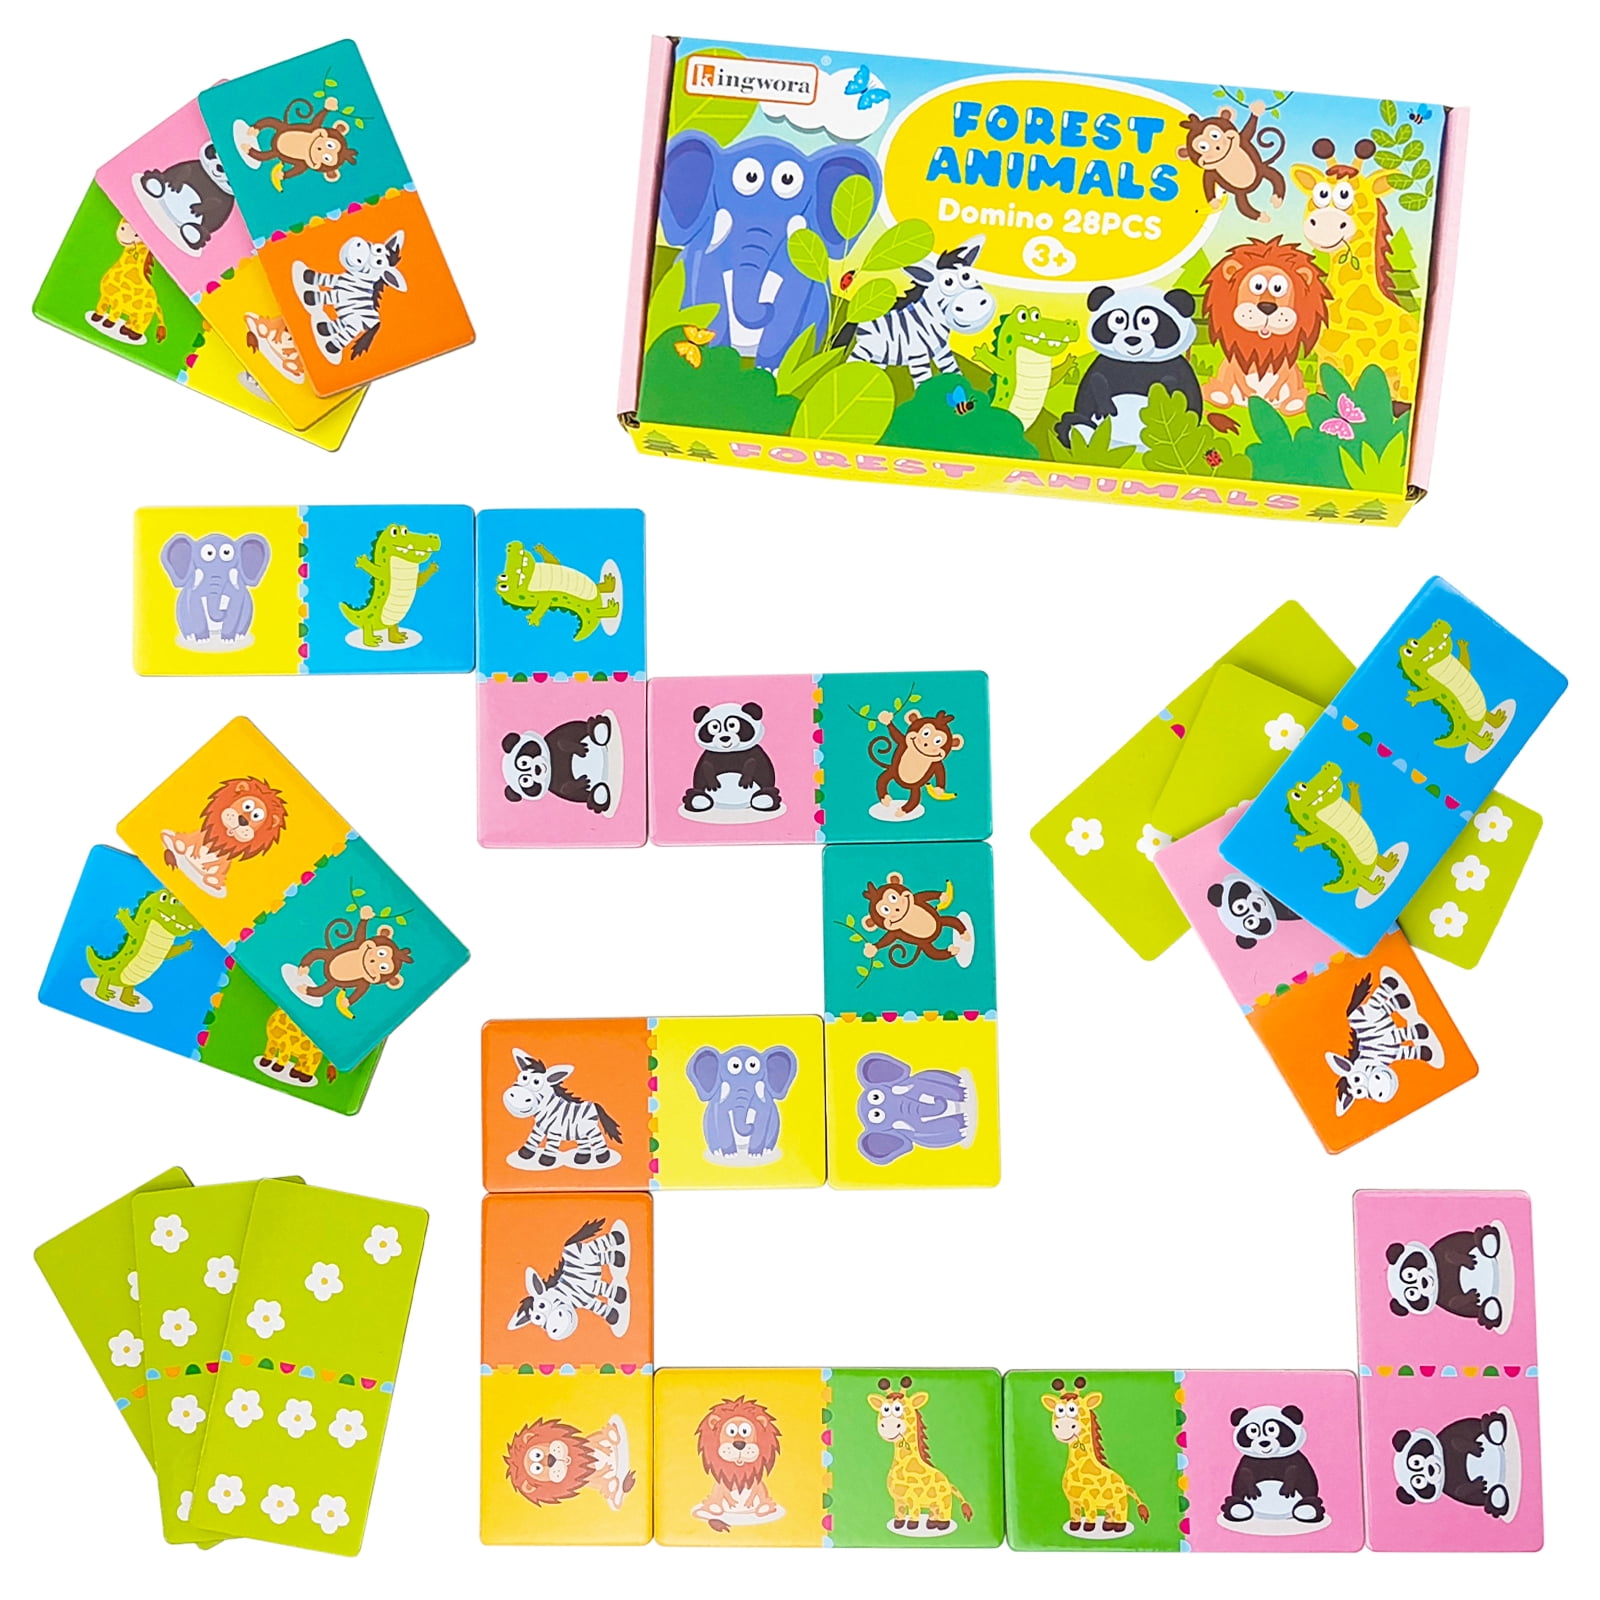 Product Image of the Kingwora Matching Game